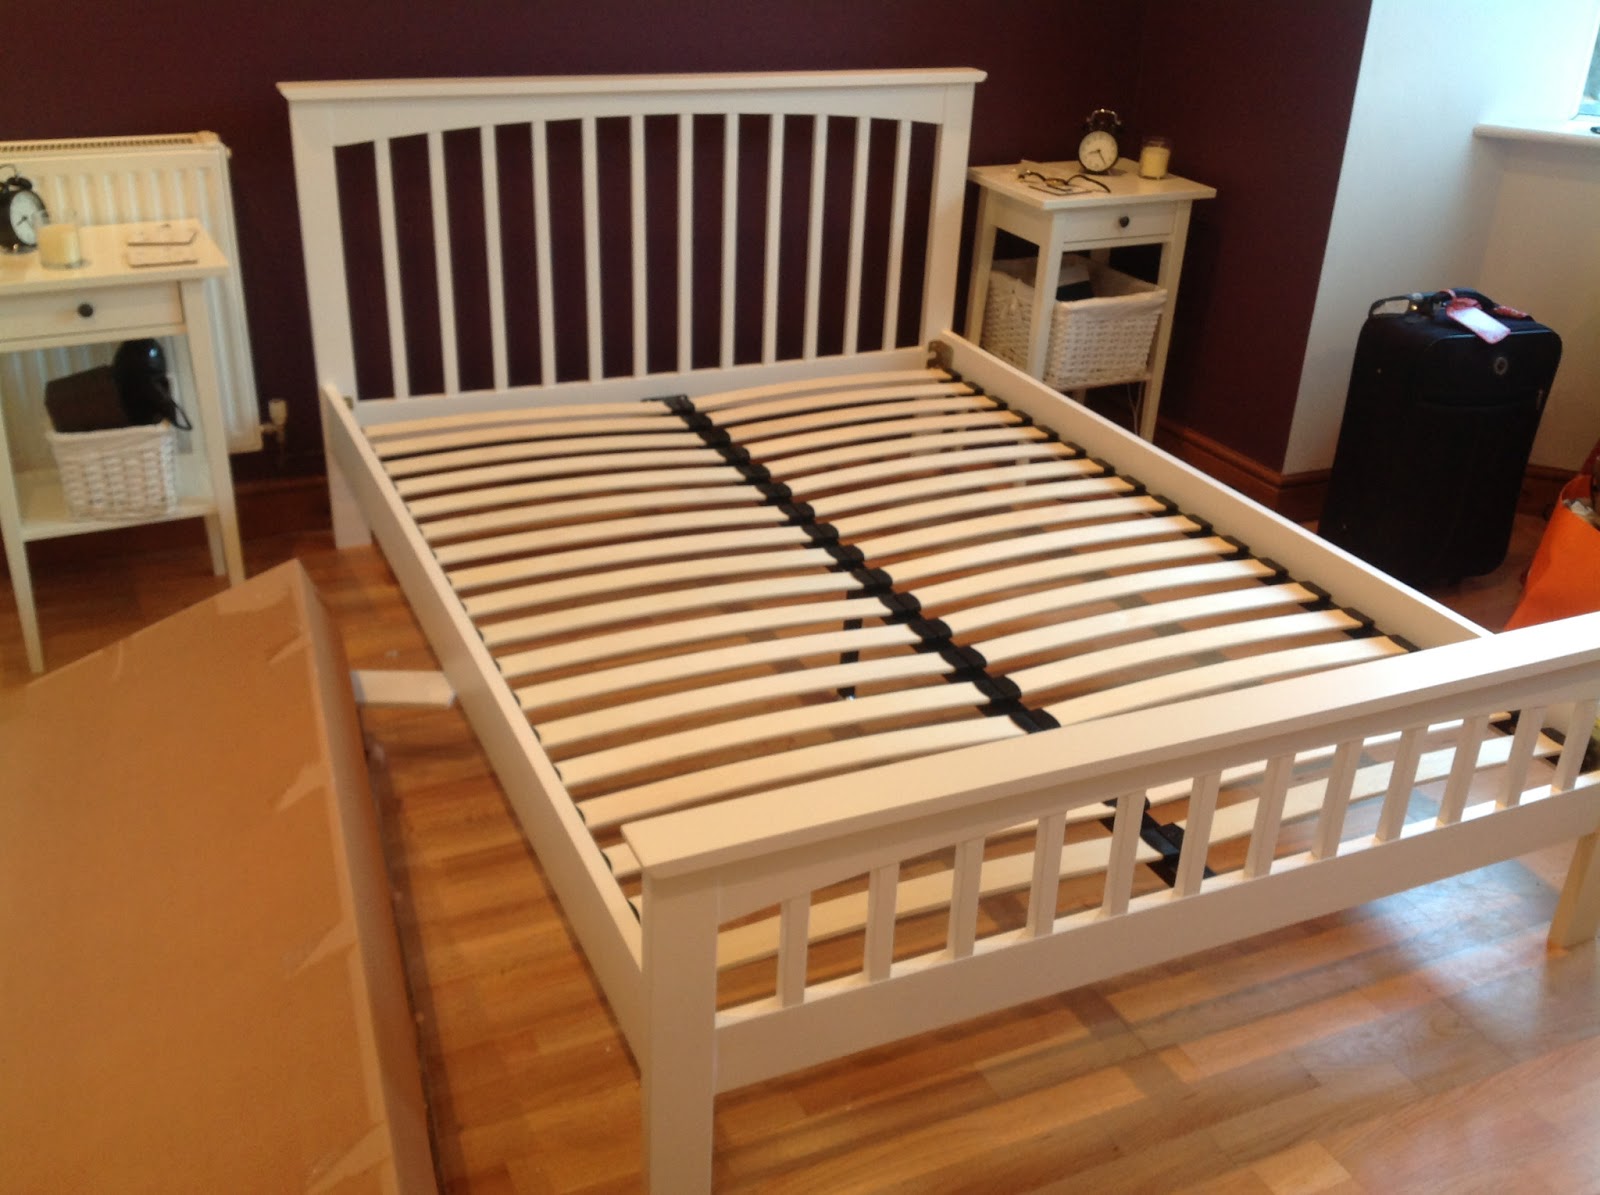 Furnishing Our Flat Reviews, Hemnes Bed Frame Review